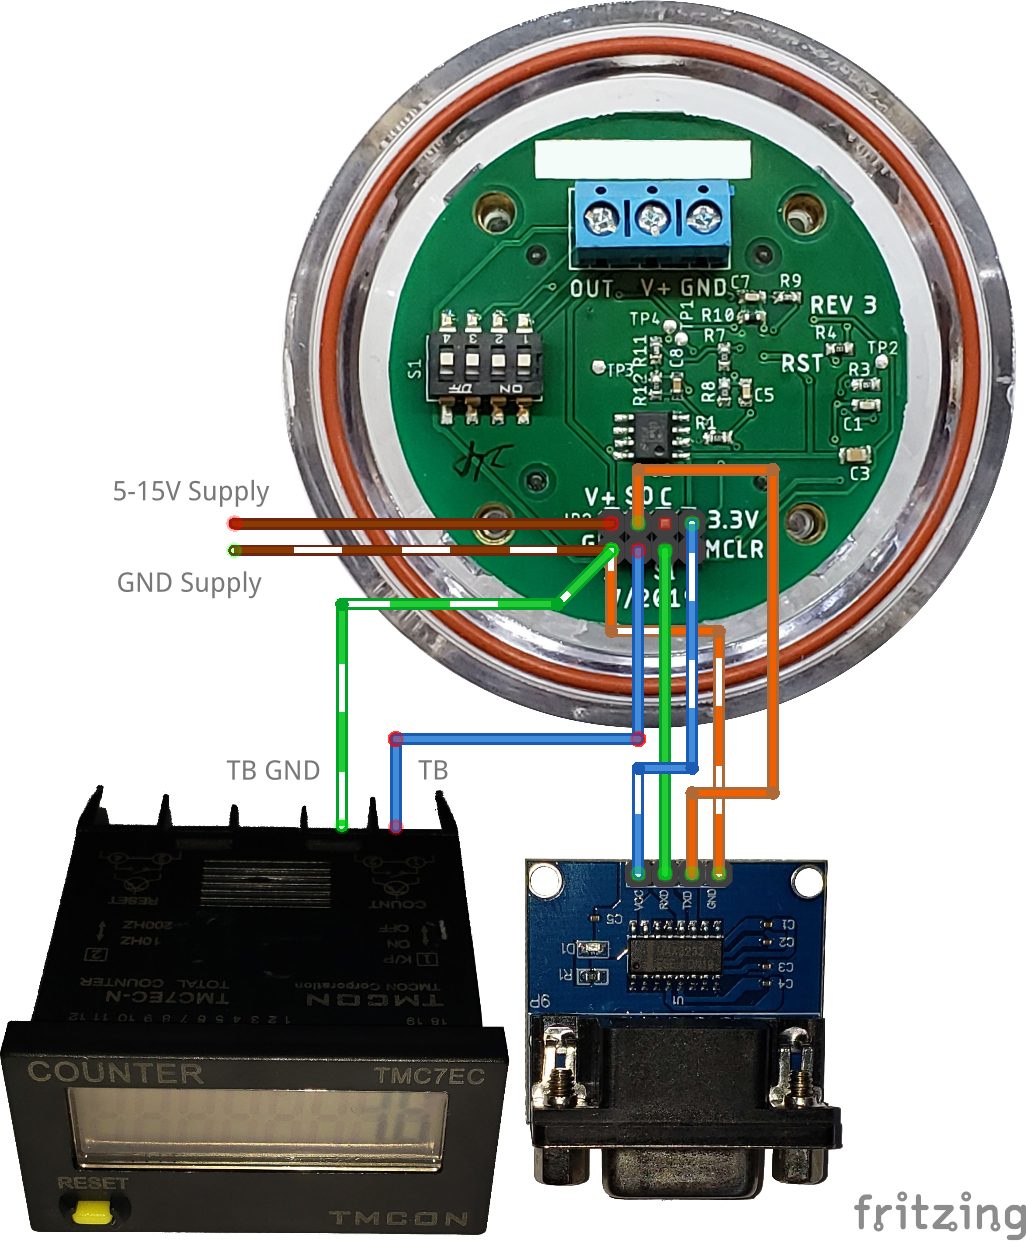 Diagram showing connections between the RG-15 and the RS232 adapter.